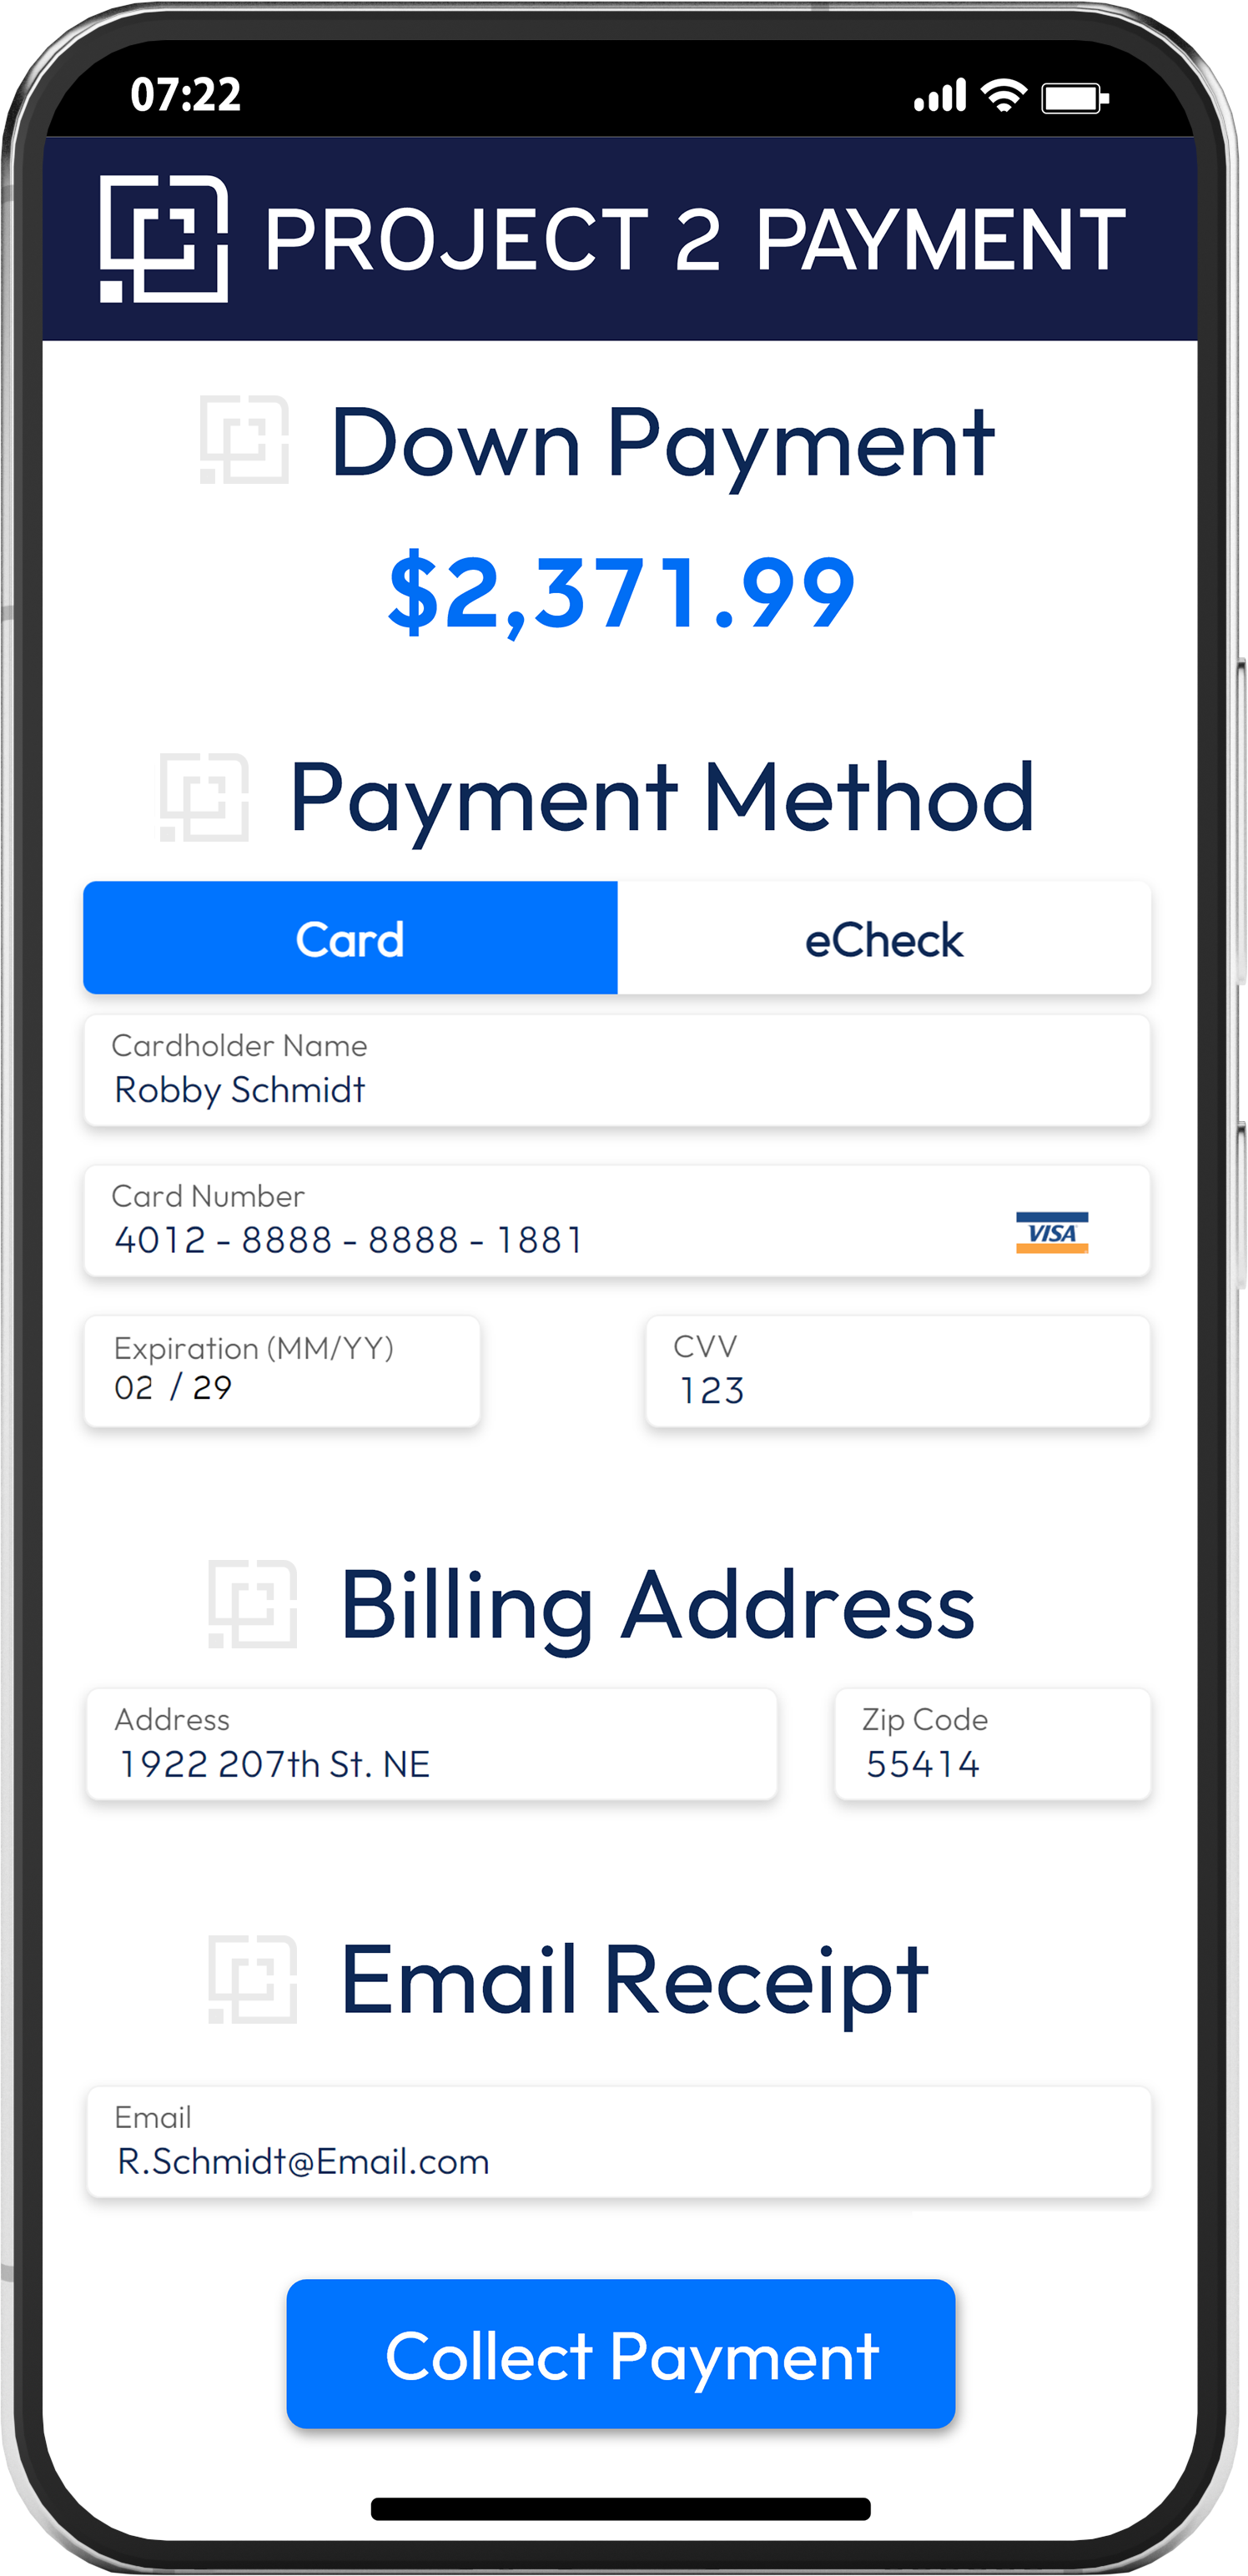 When you need to, take a down payment by typing in the percentage or total amount down. You can send an email to your customer to prompt a down payment instantly and take credit cards, debit cards, and e-checks securely online with Project 2 Payment.